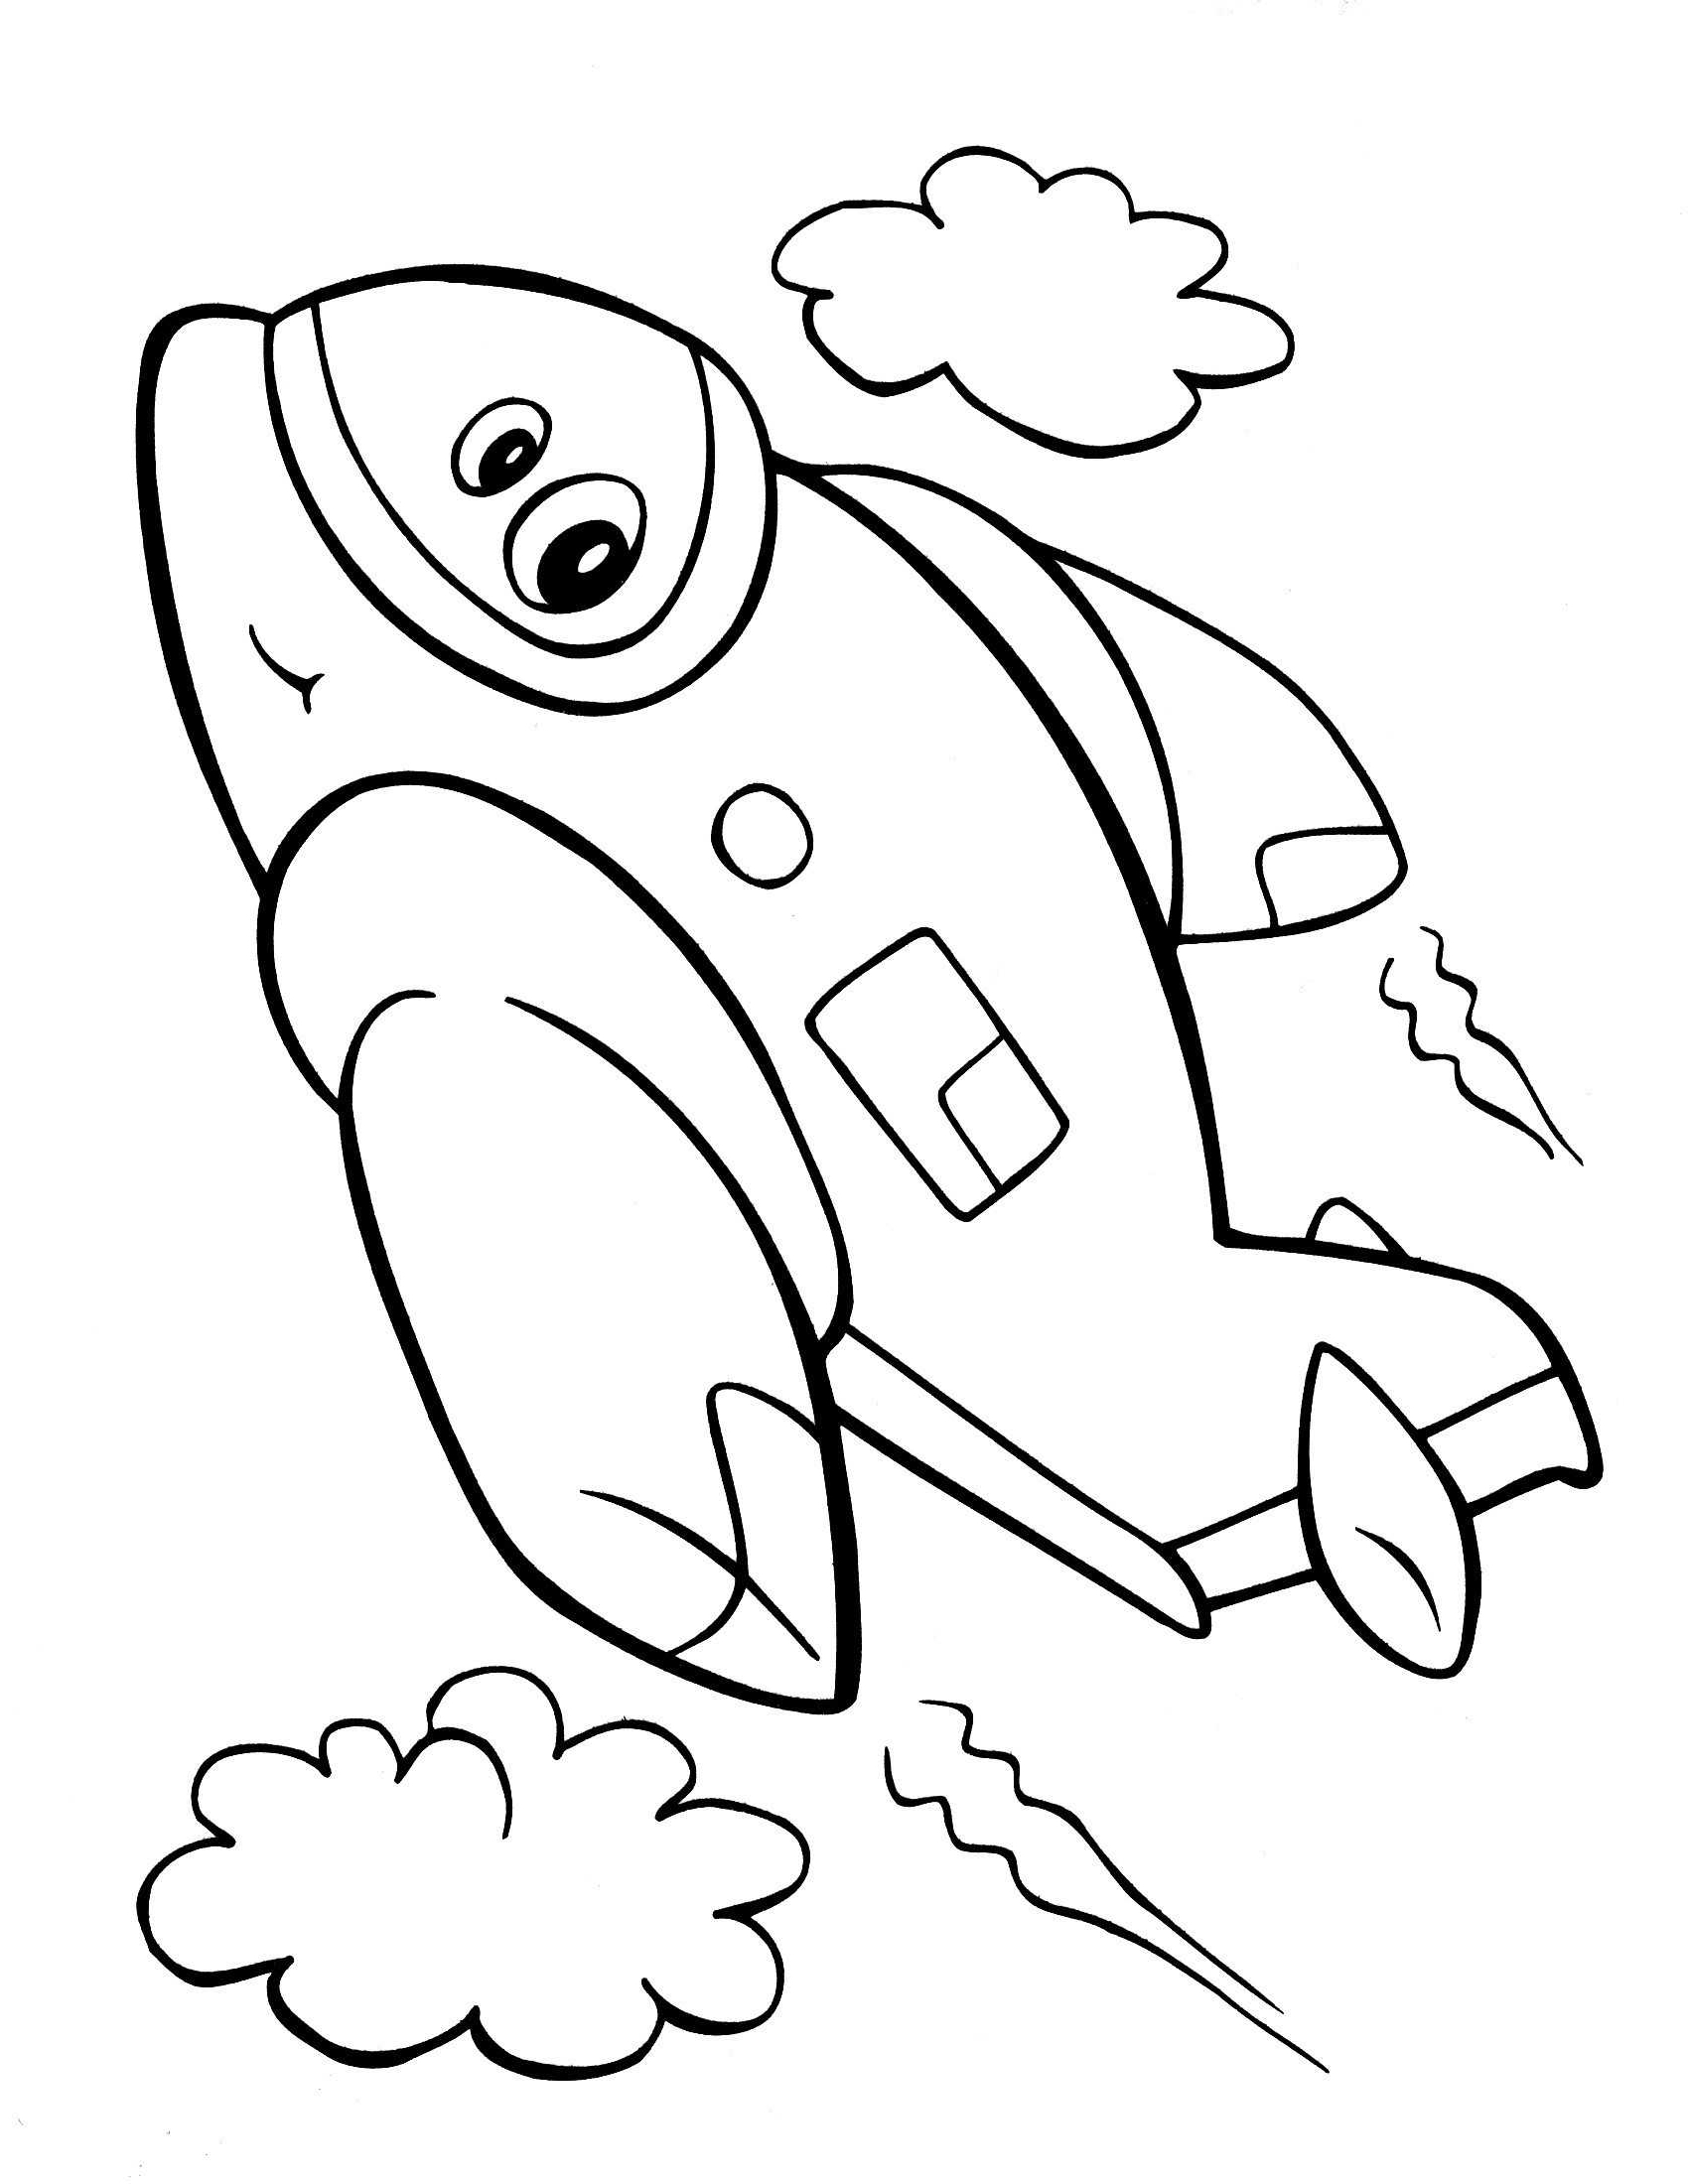 Giant Coloring Pages For Adults Coloring Design Crayola Coloring Pages Giant Colouring Australia